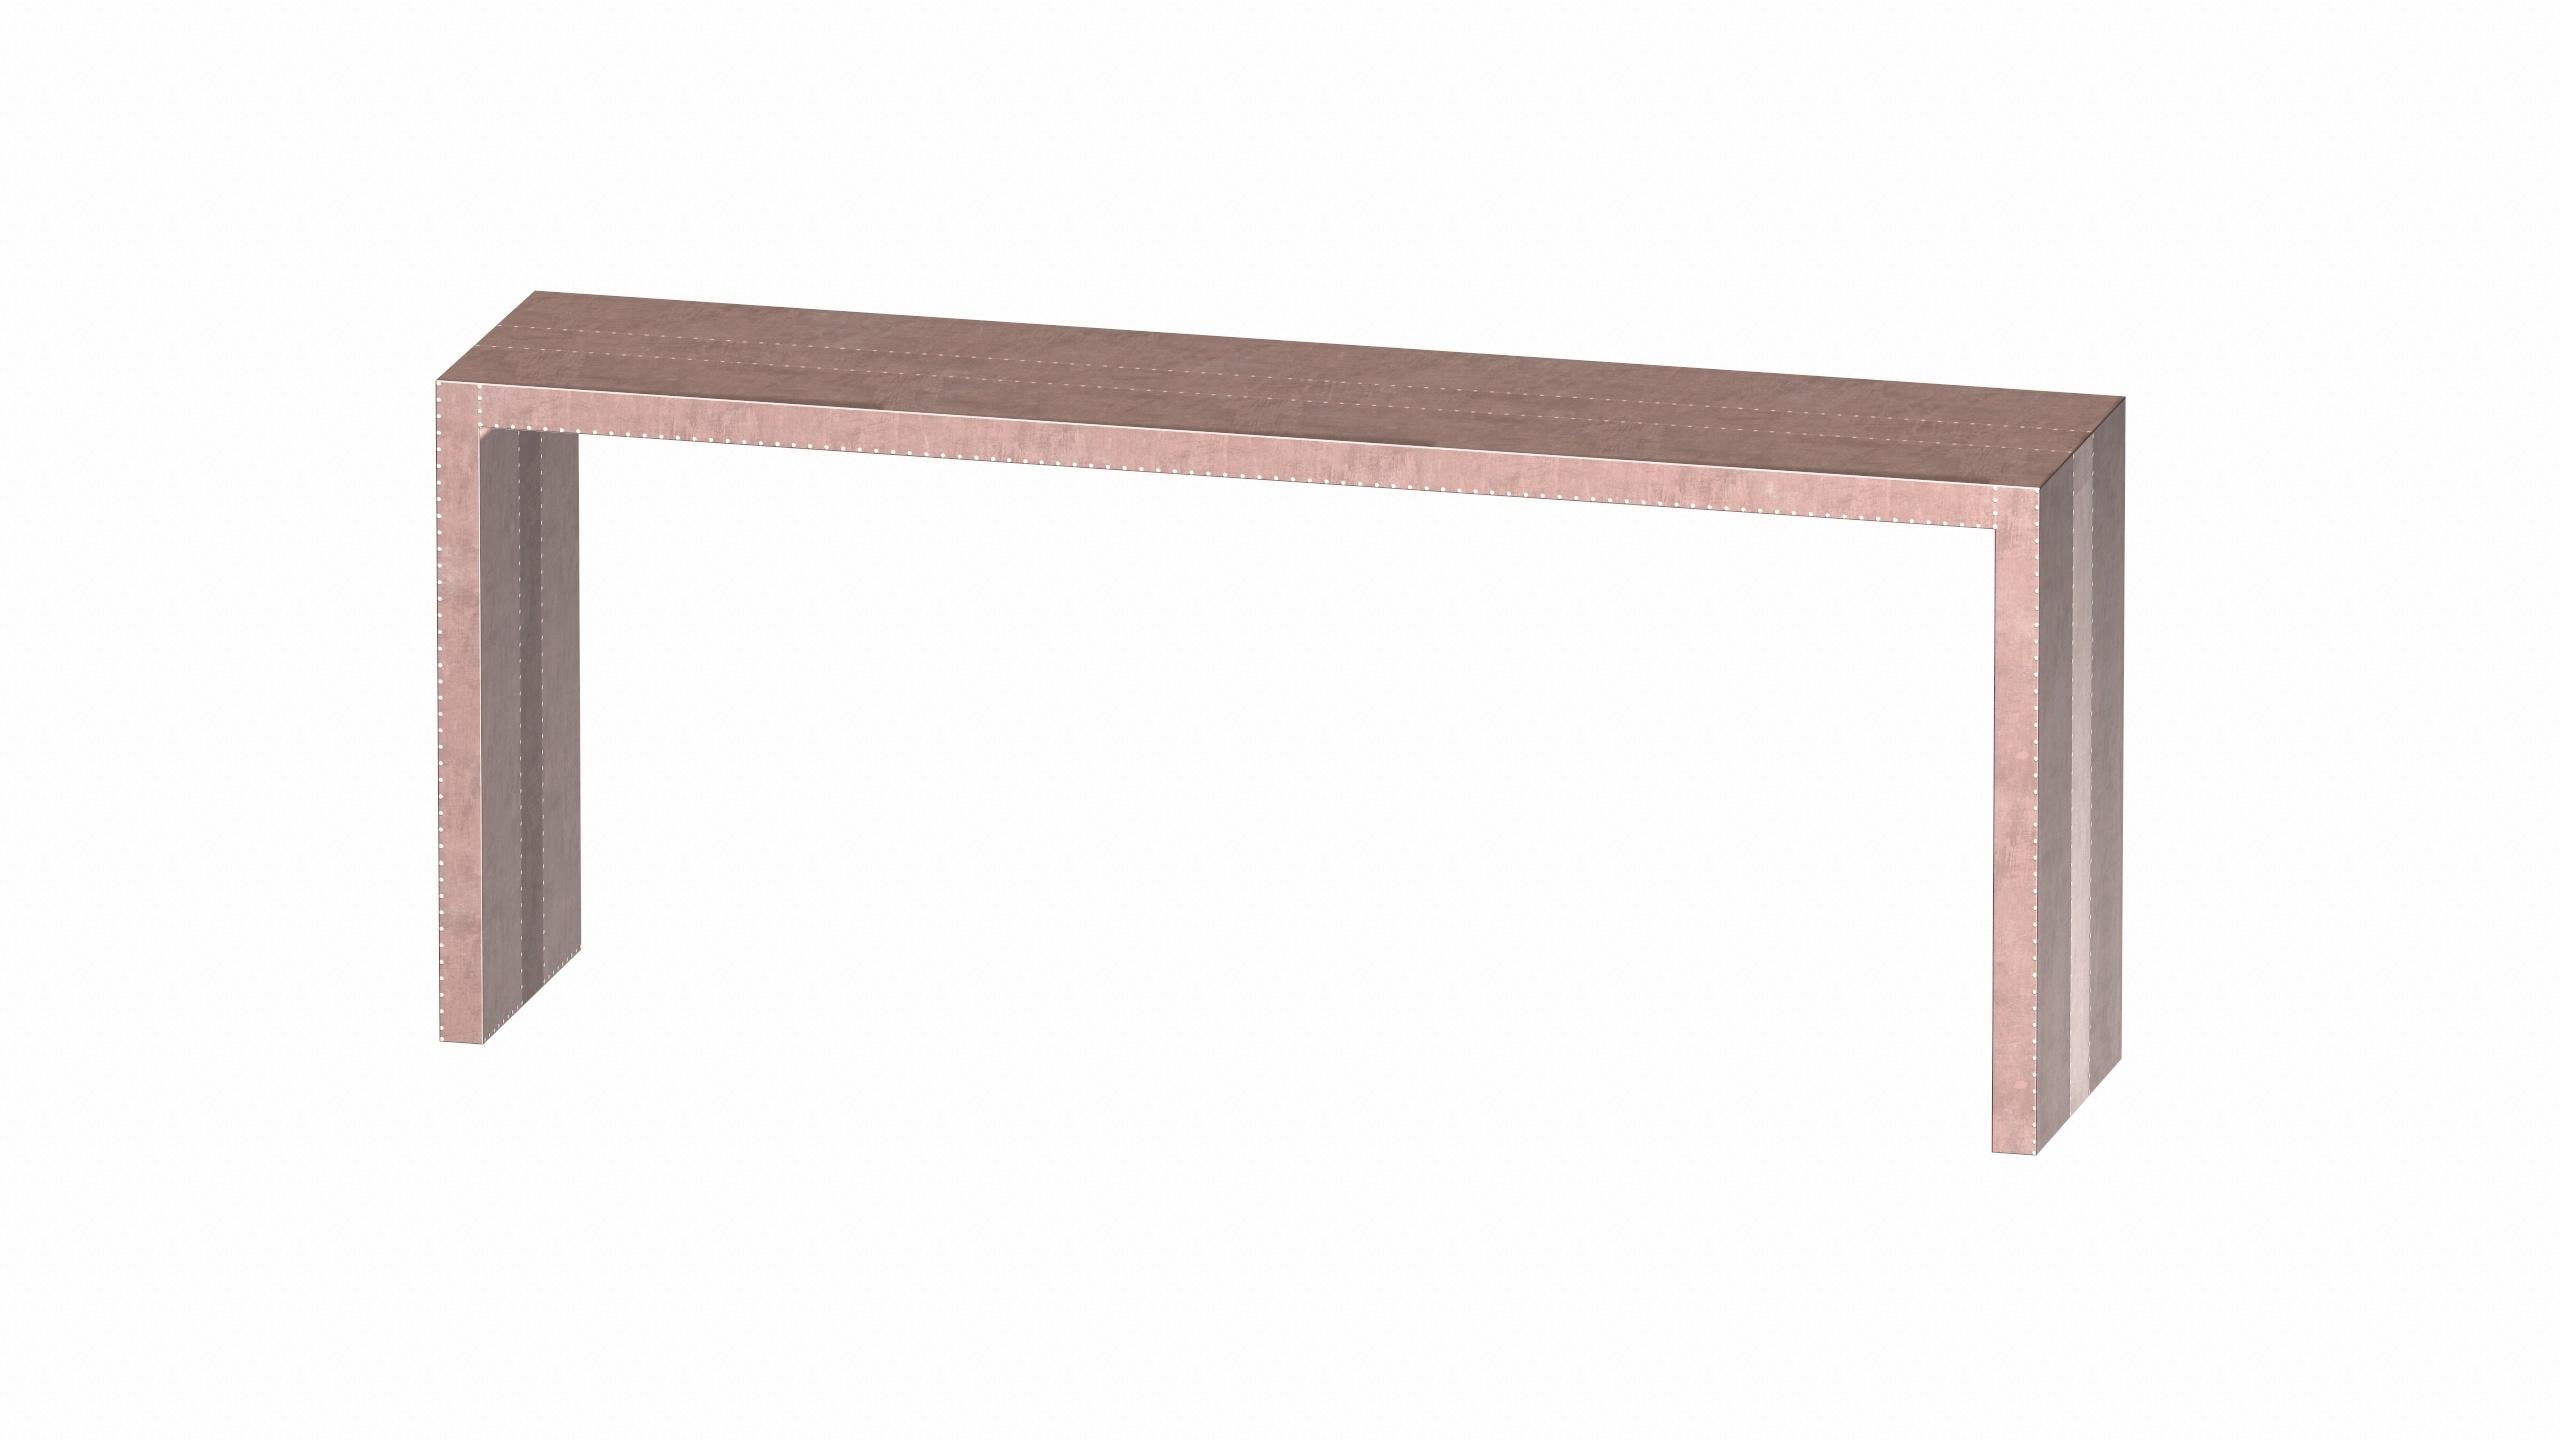 Art Deco Rectangular Console Tables Fine Hammered Copper by Alison Spear For Sale 3